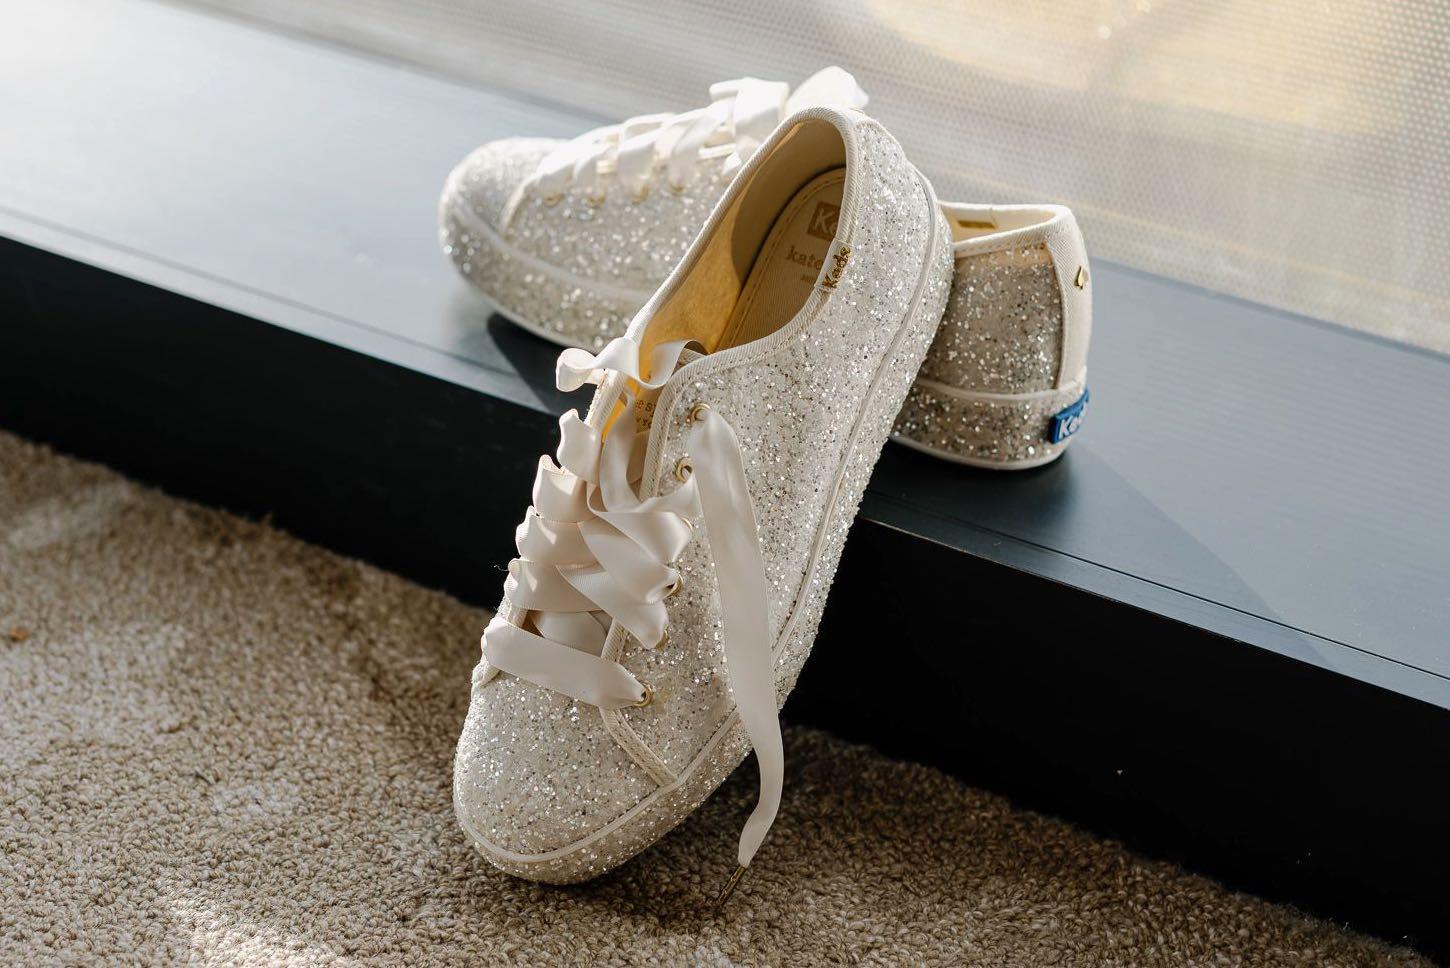 Keds x Kate Spade New York Triple Kick All-over Glitter Wedding Bridal  Sneakers Shoes ✨, Women's Fashion, Footwear, Sneakers on Carousell